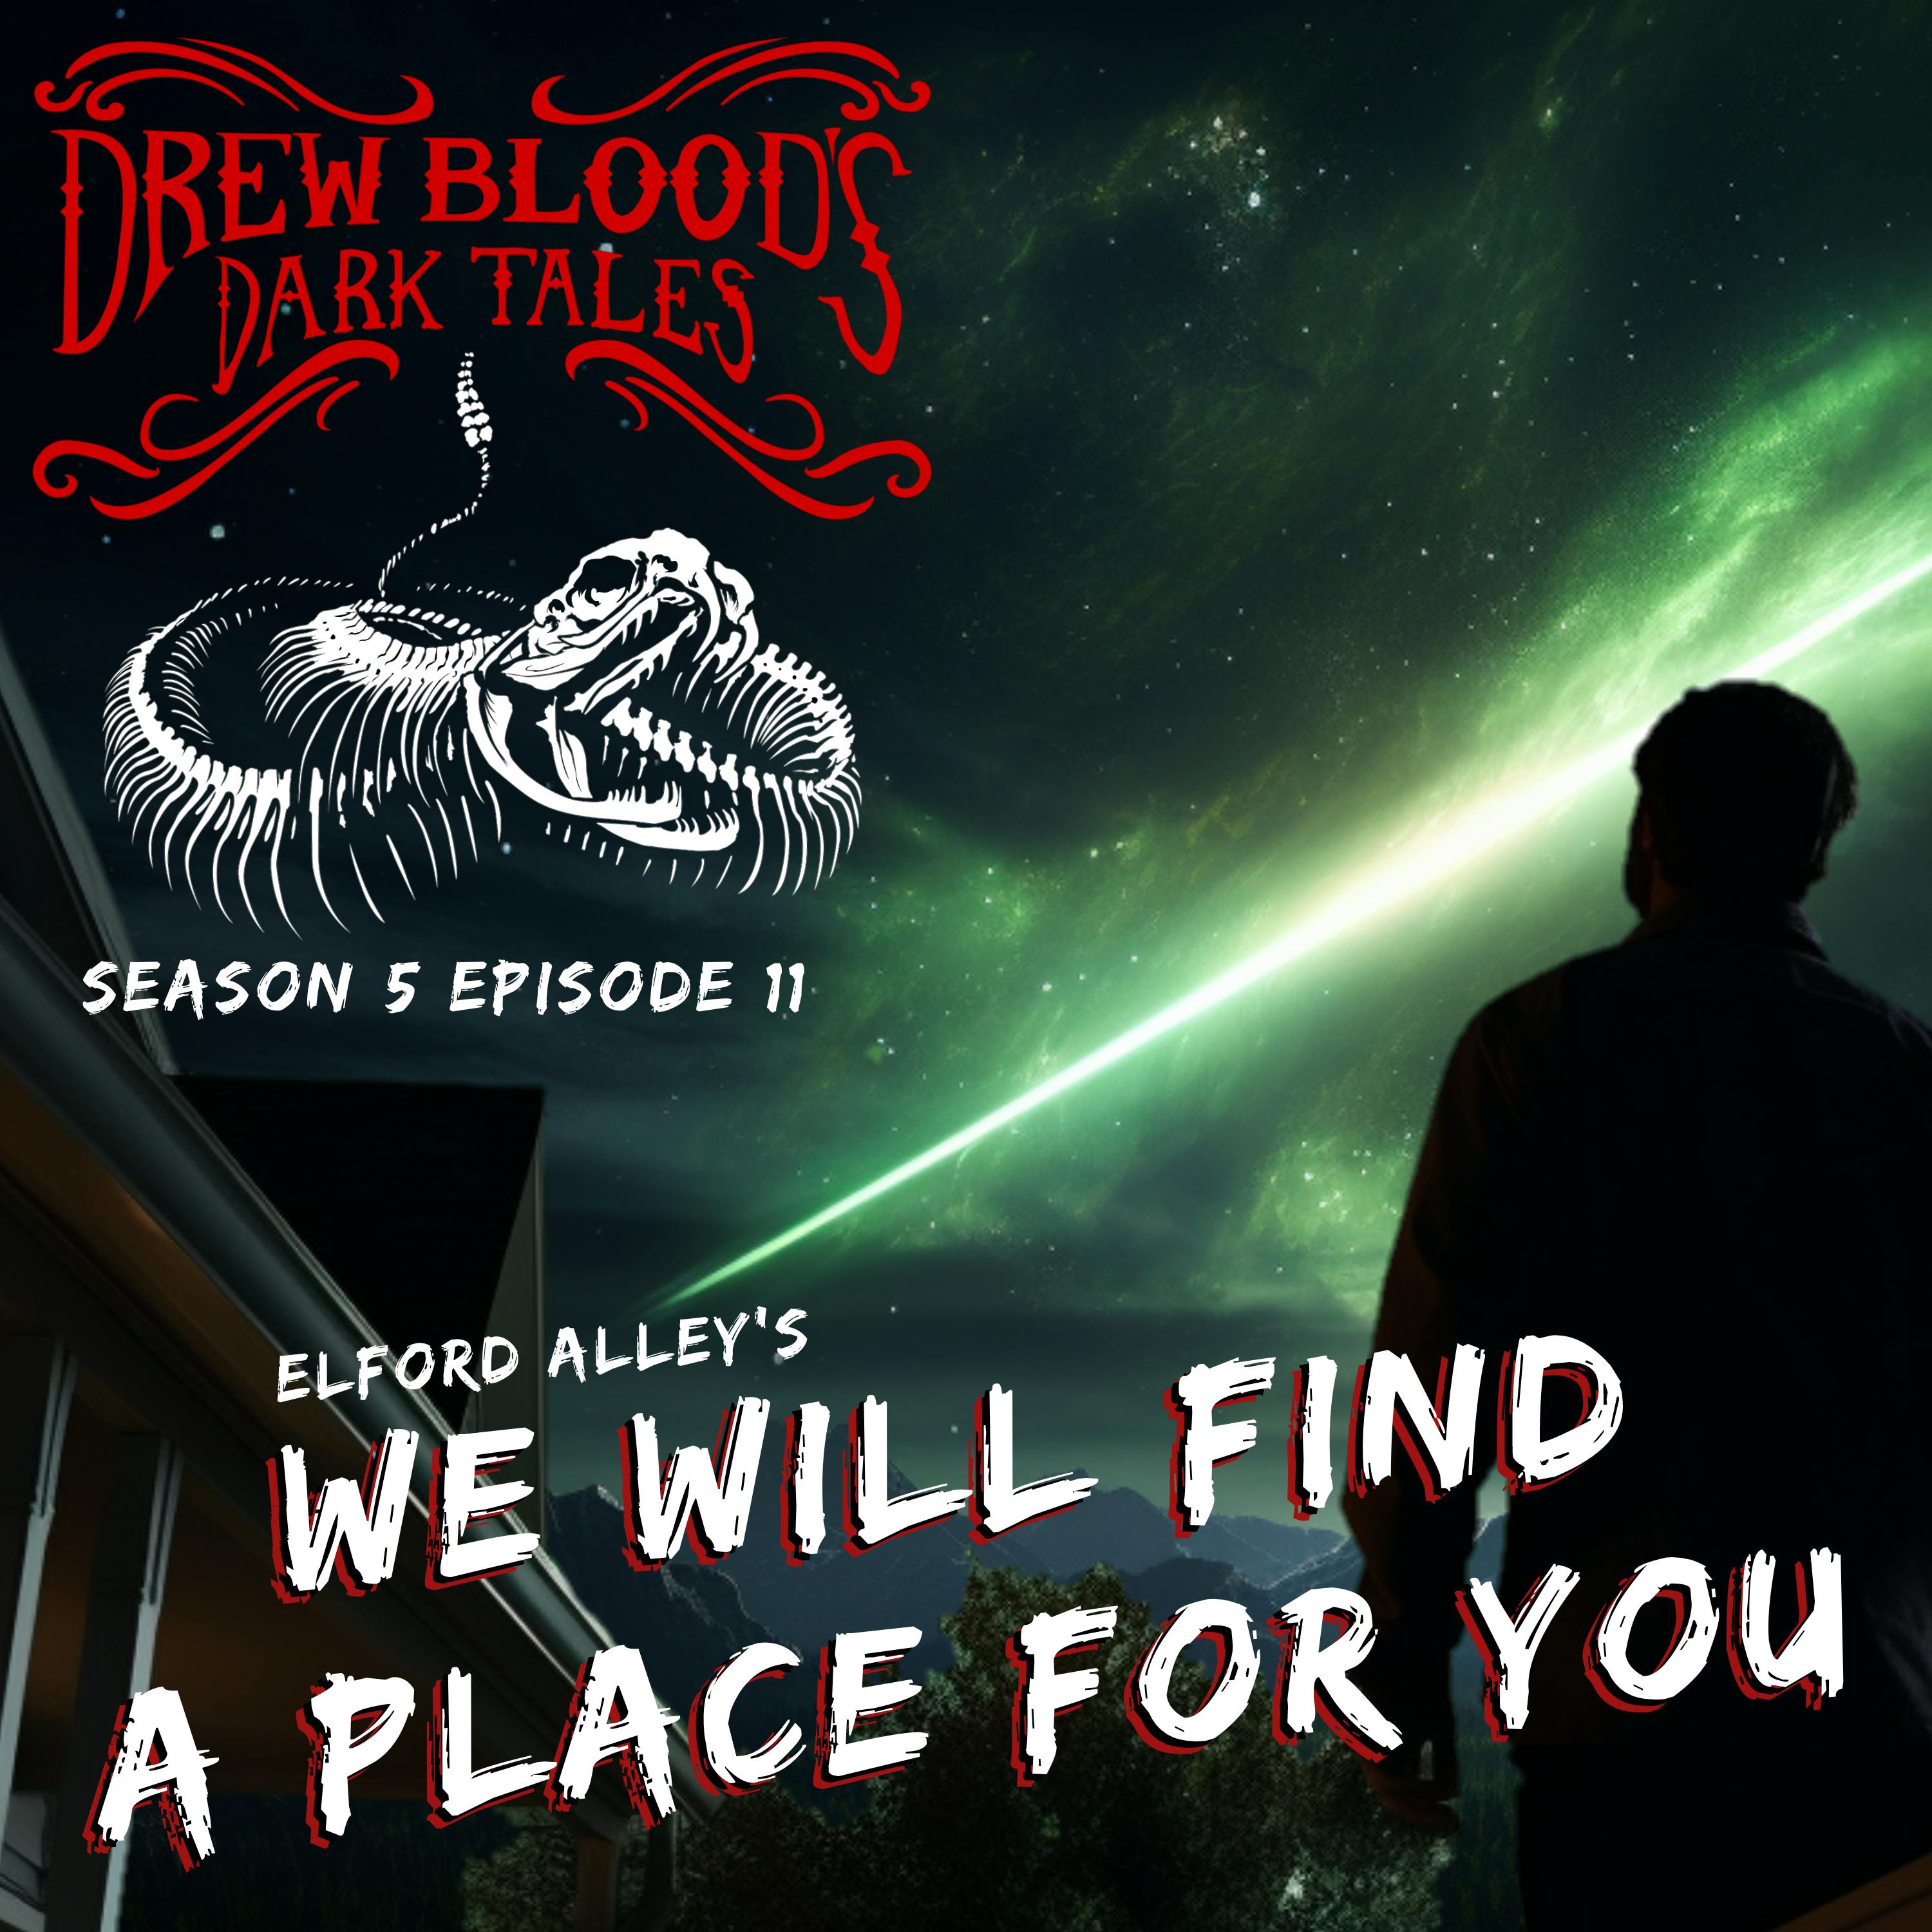 S5E11 - "We Will Find a Place for You" - Drew Blood